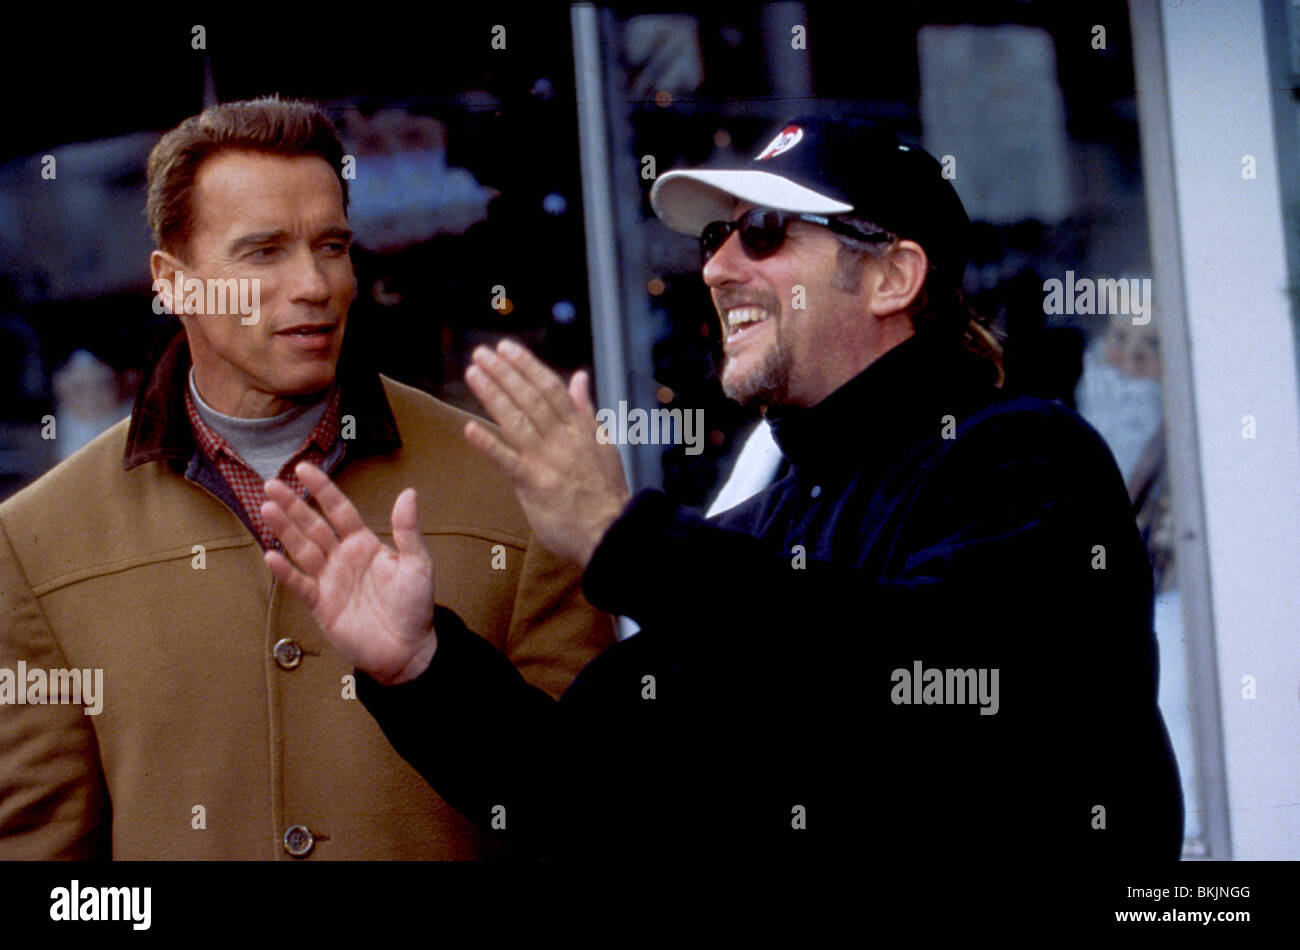 BRIAN LEVANT (DIR) O/S 'JINGLE ALL THE WAY (1996)' WITH ARNOLD SCHWARZENEGGER BRLE 002 Stock Photo